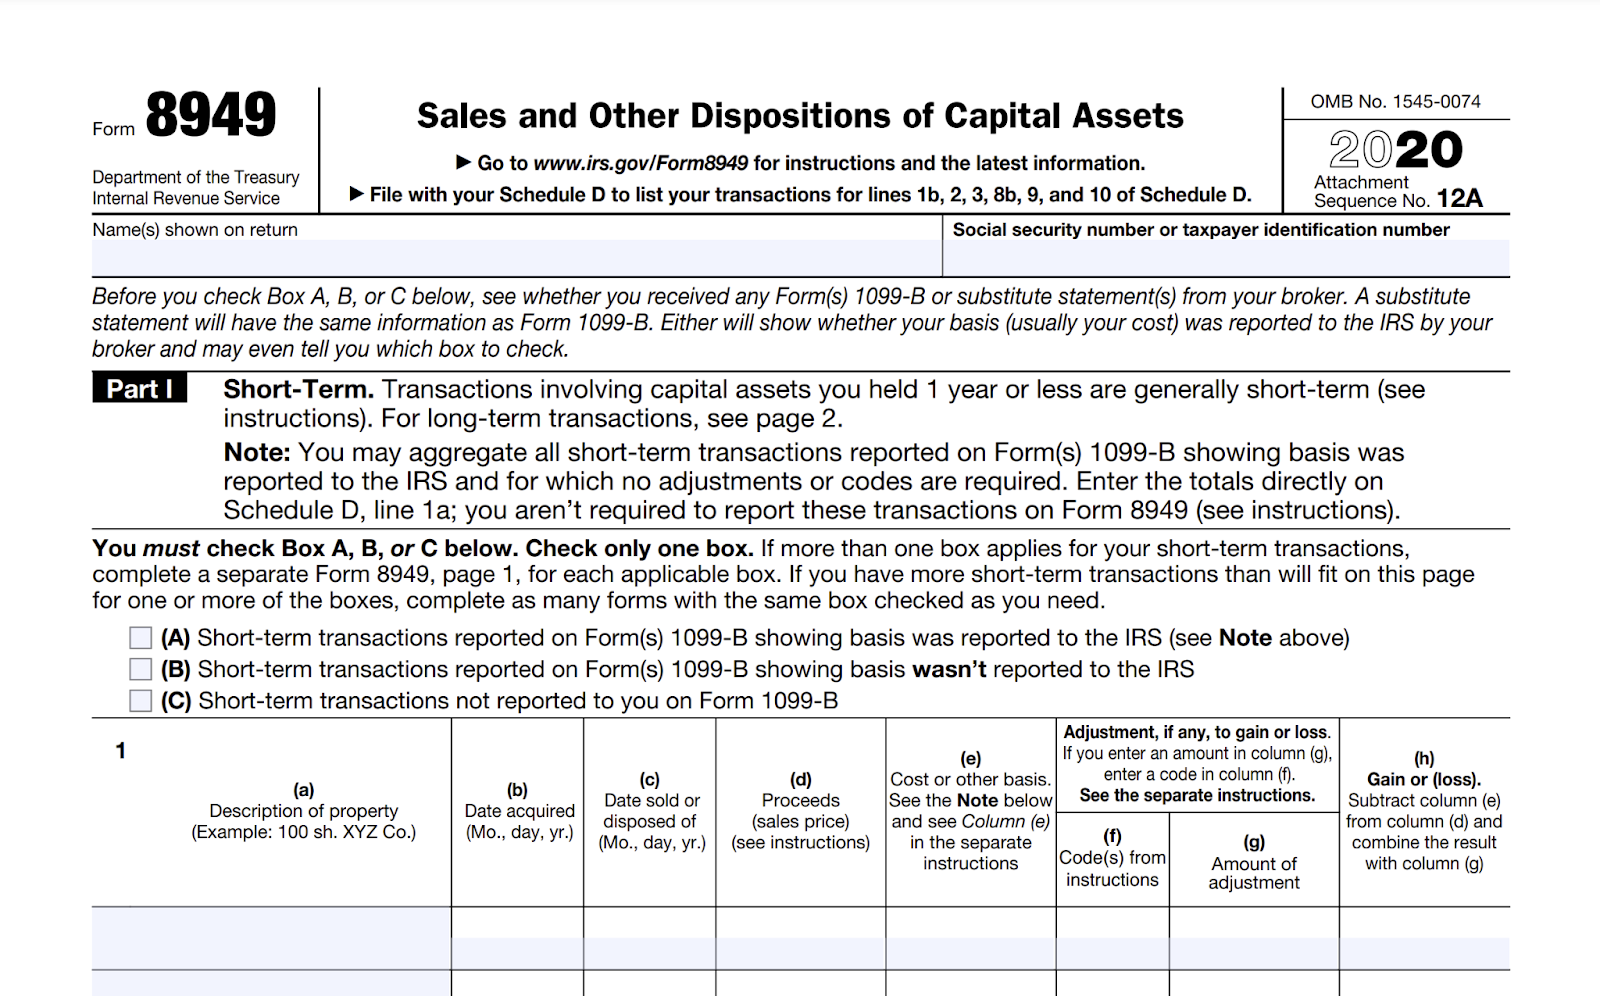 Screenshot of IRS Form 8949 for Sales and Other Dispositions of Capital Assets